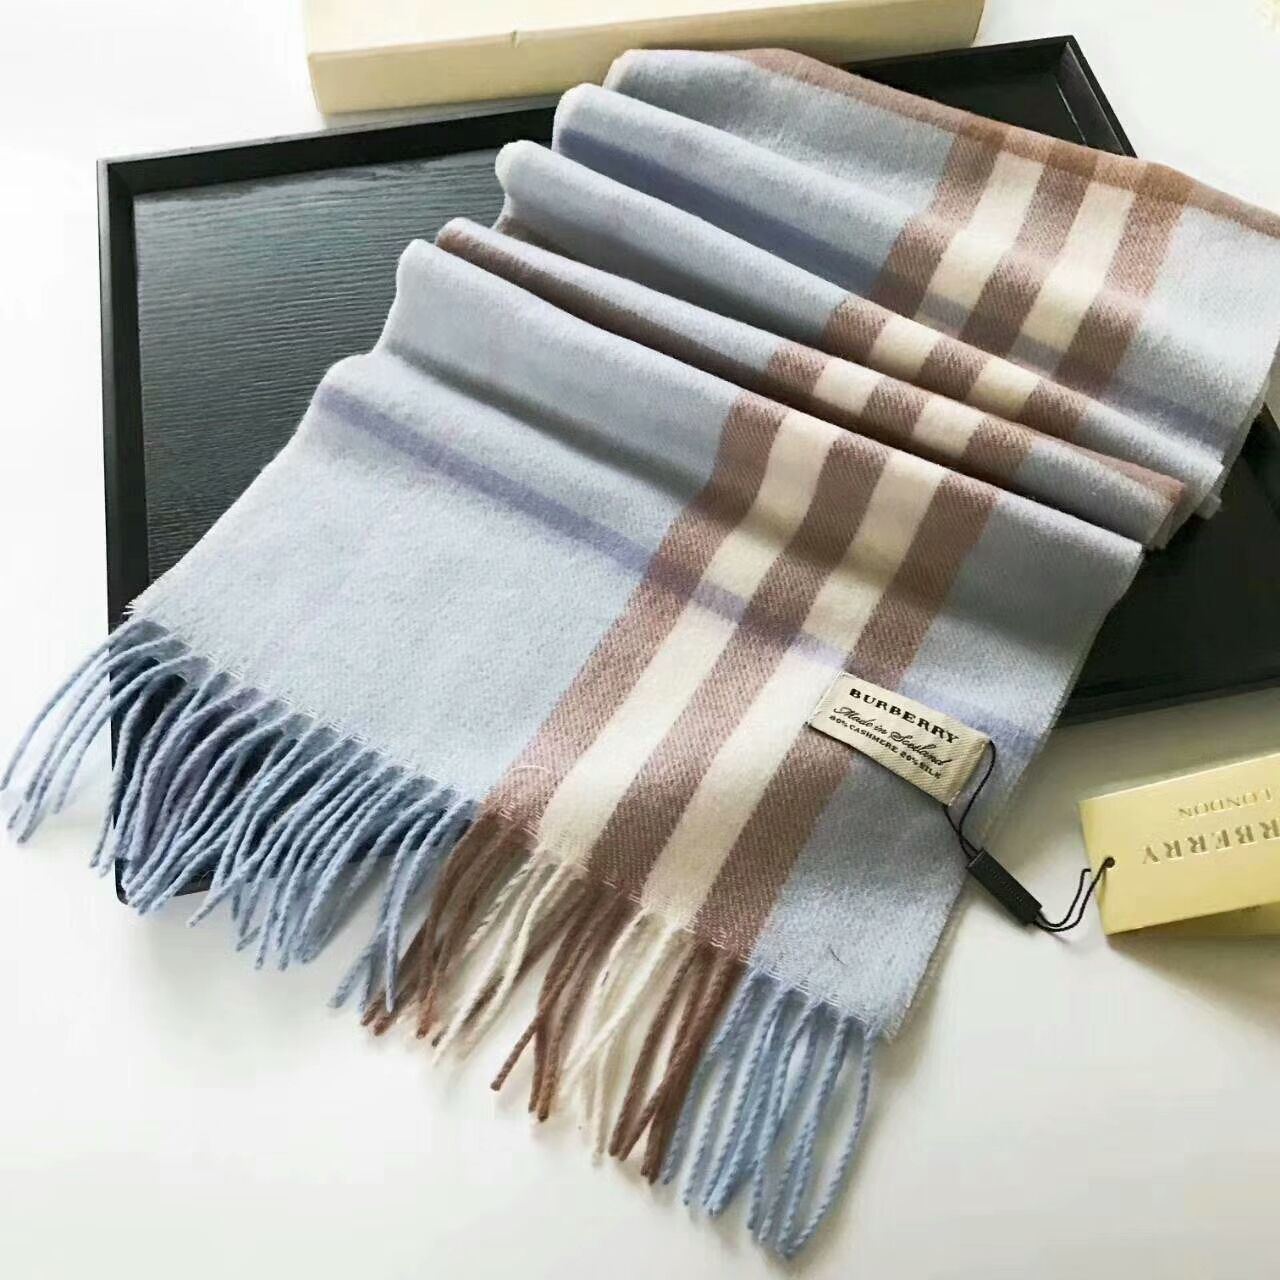 burberry scarf dhgate